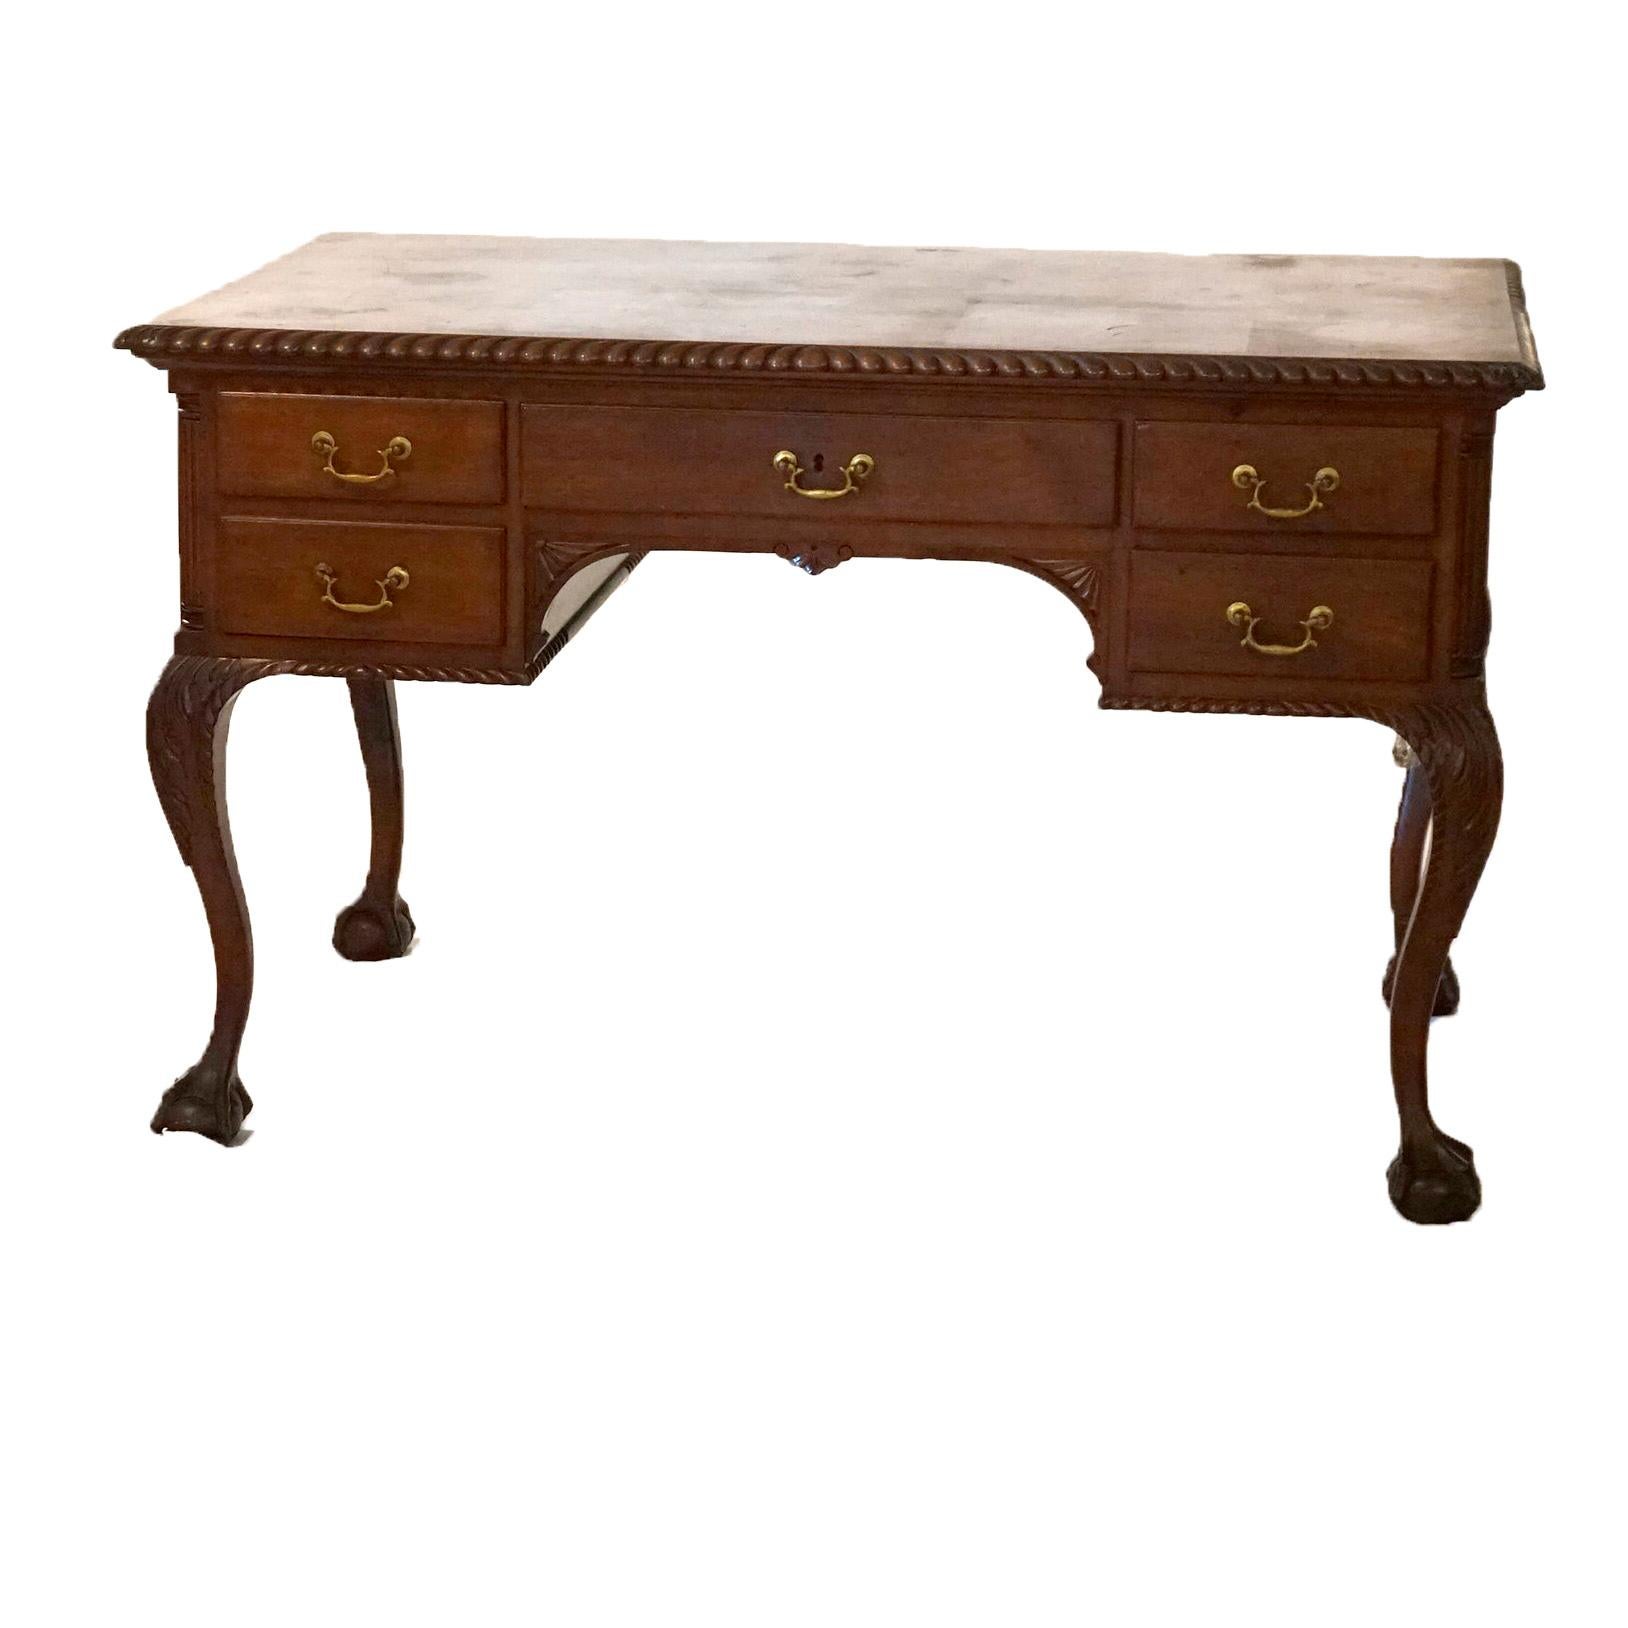 An antique Chippendale style knee hole desk offers mahogany construction with top having rope twist trim over central drawer with flanking smaller drawers and reeded columns, raised on cabriole legs having carved acanthus knees and claw and ball